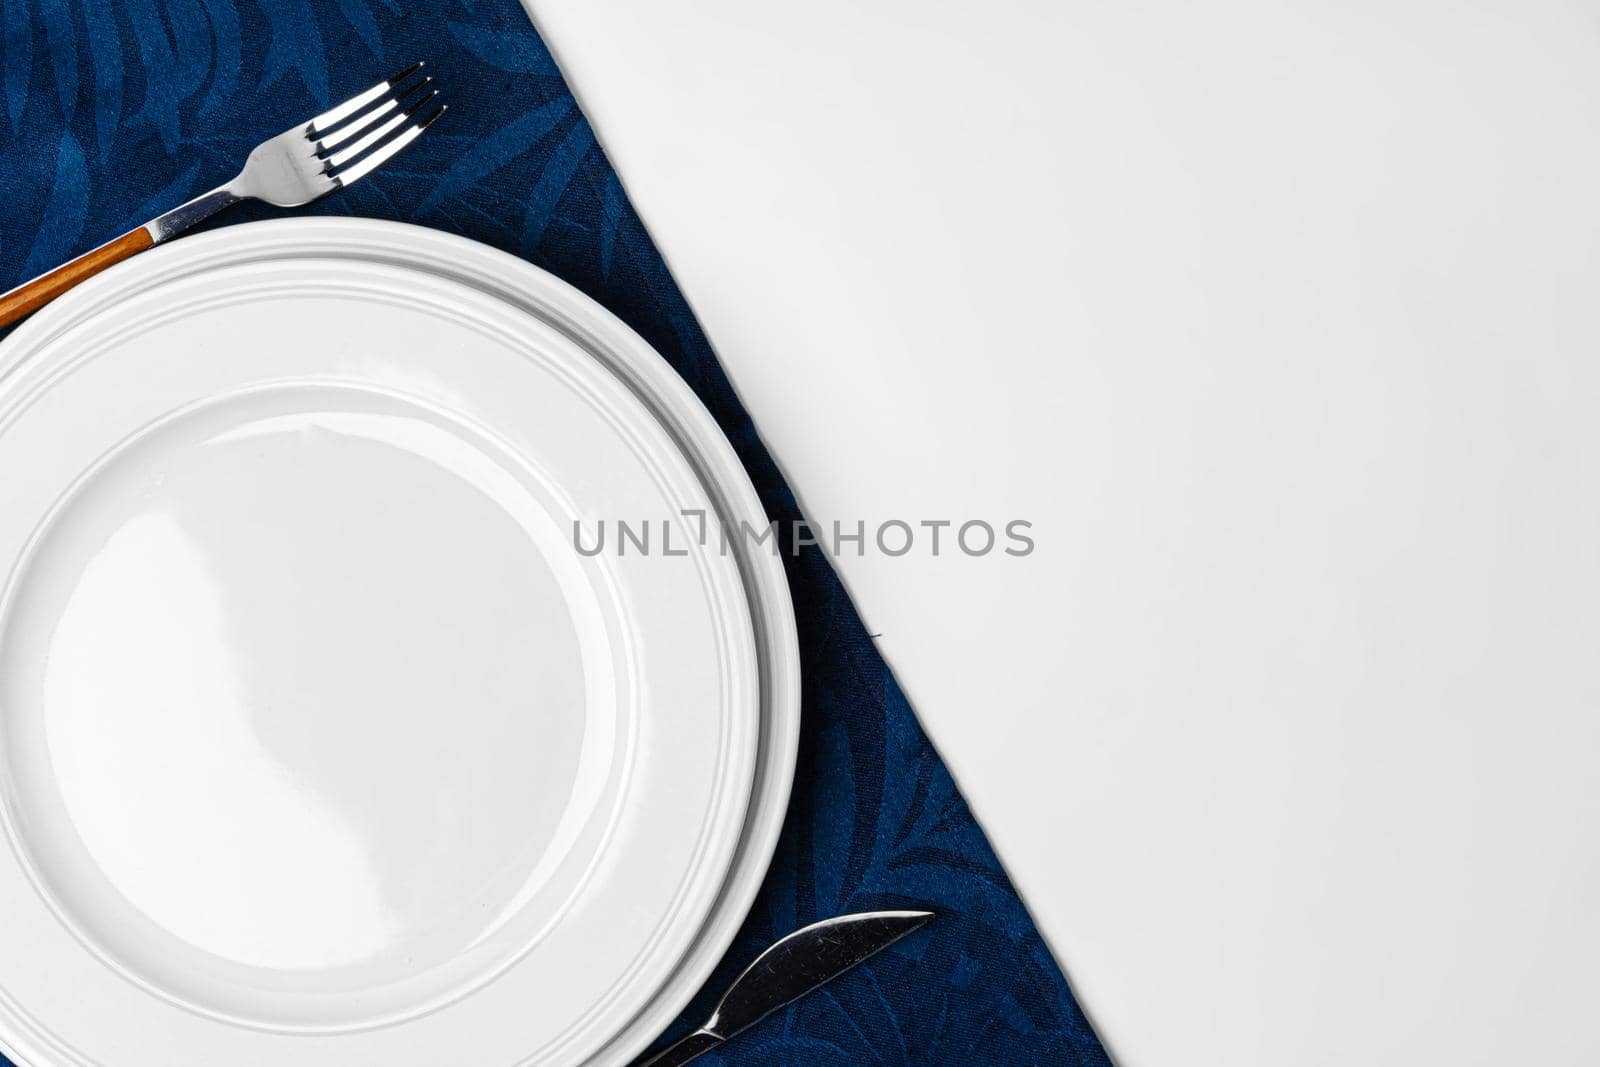 Fork, knife and plate on towel. Isolated on white background. by Fabrikasimf